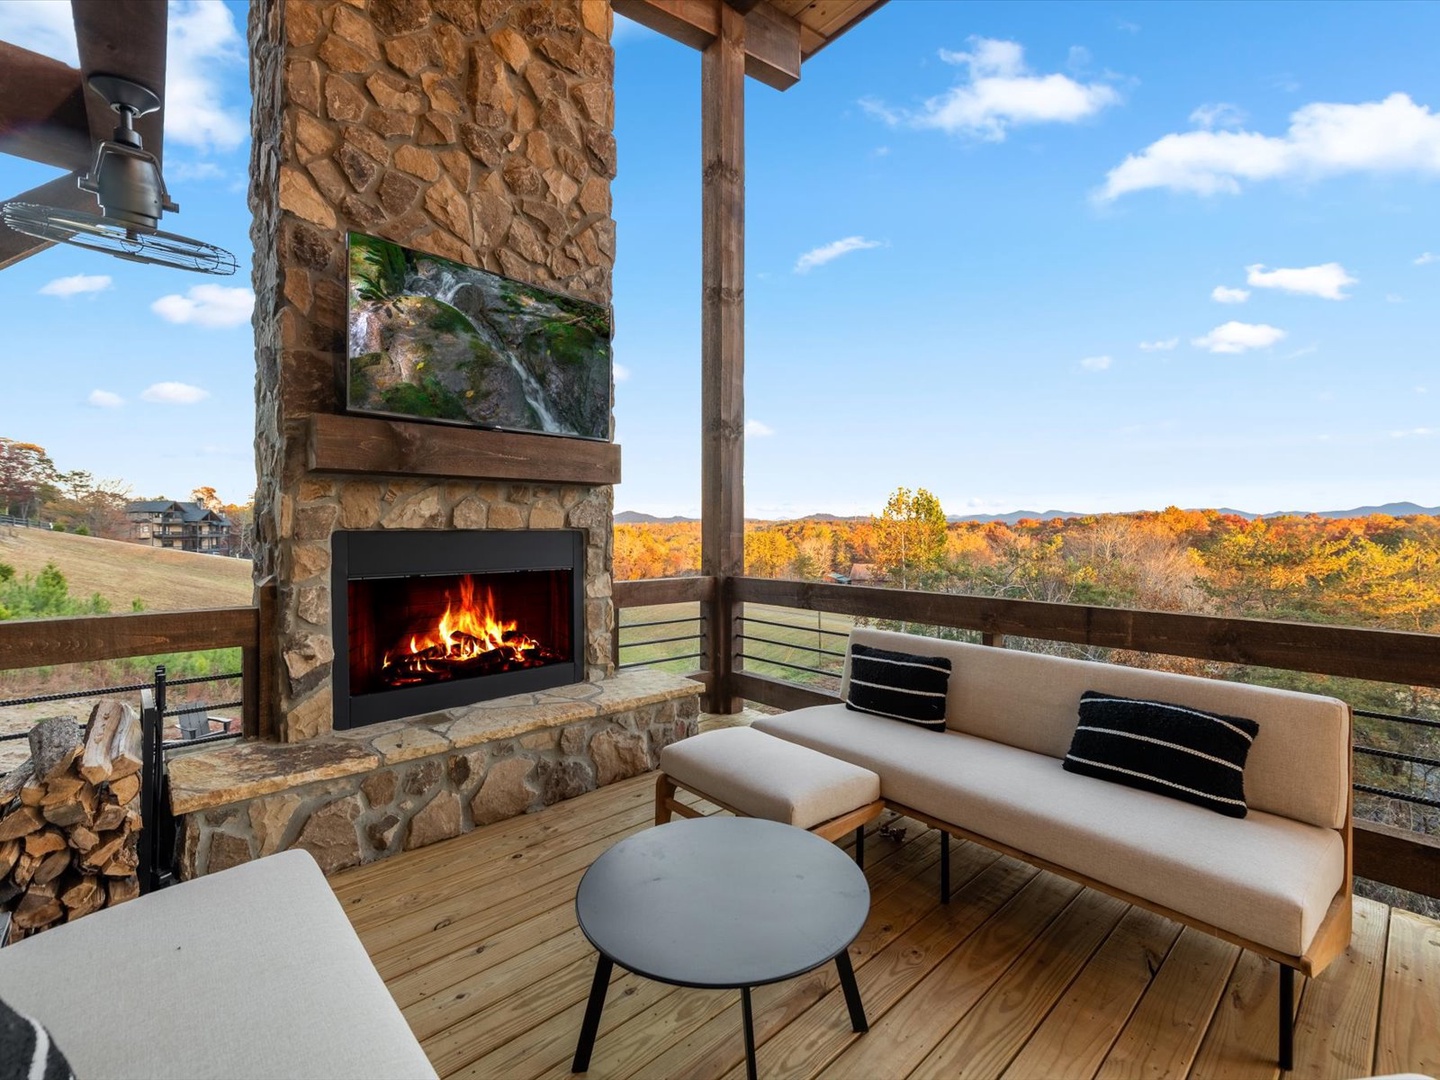 Harvest Moon - Entry Level Deck Fireplace and Seating